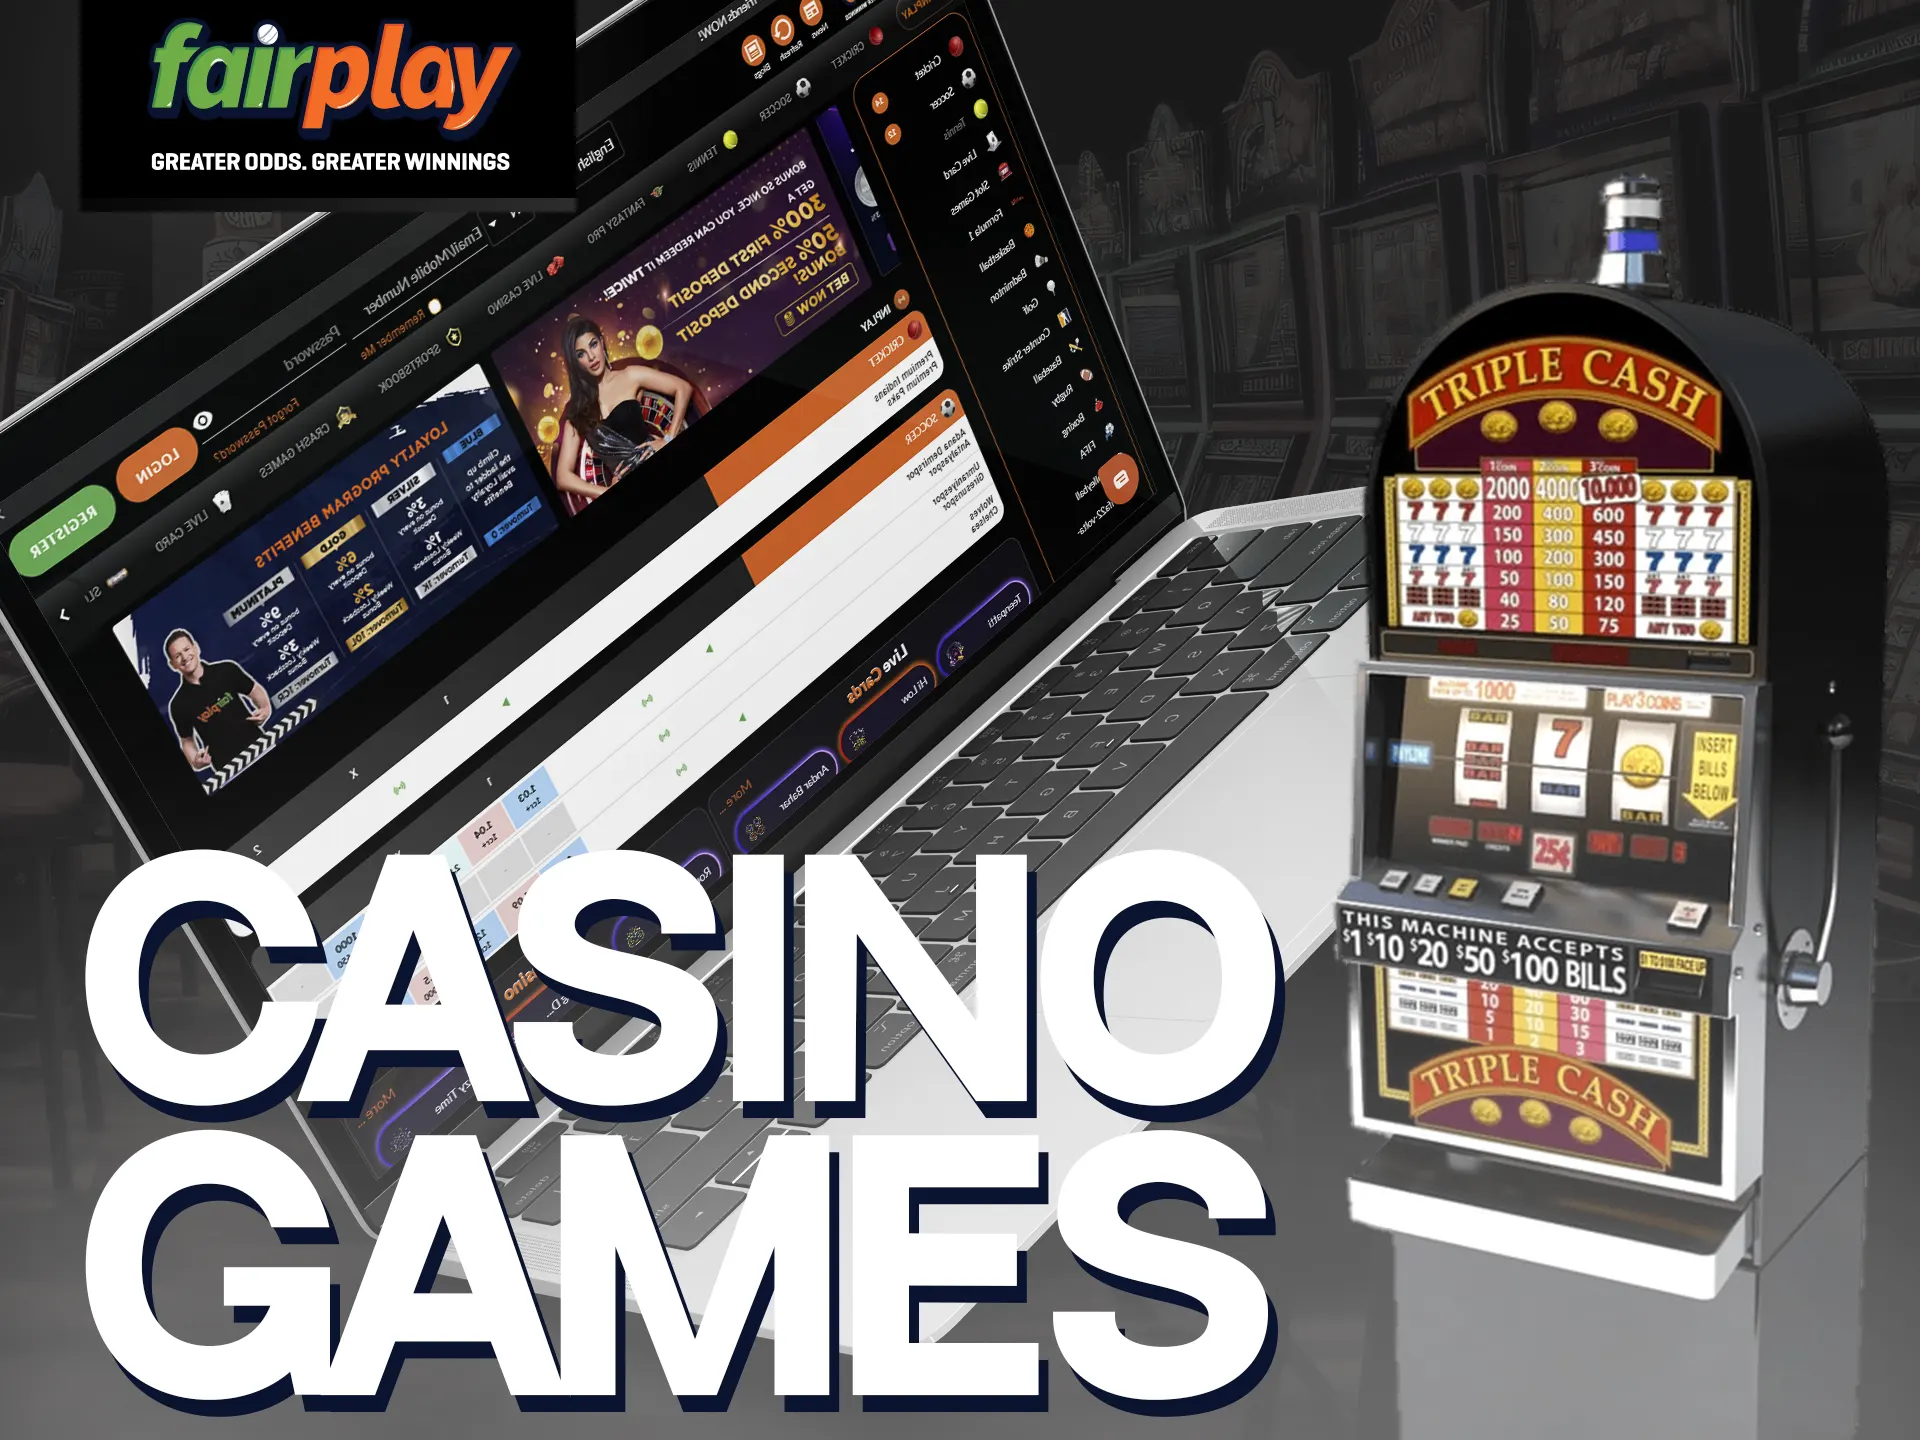 Fairplay casino games offers live card games, classic slots, and innovative slot features.